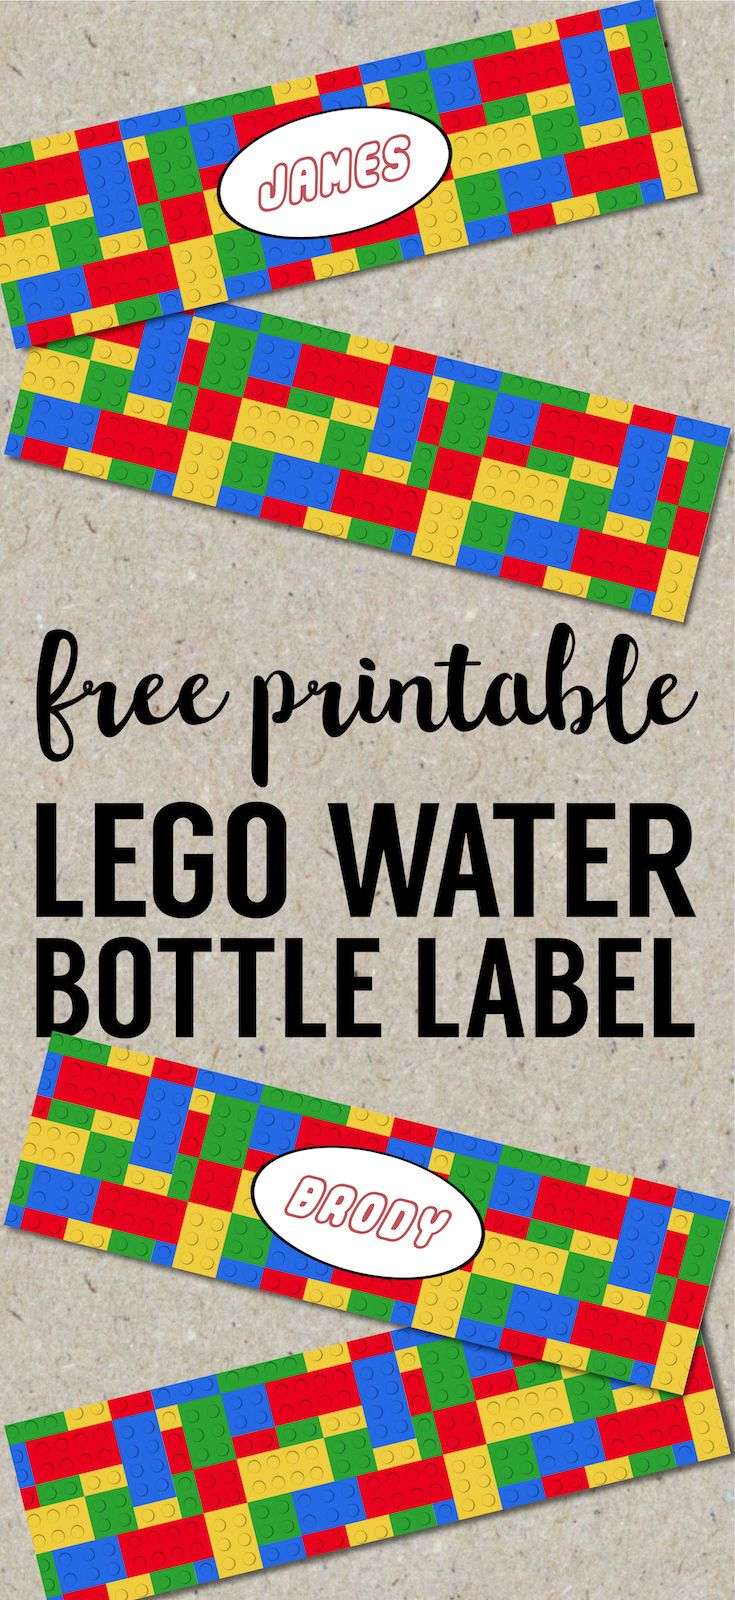 Free Printable Lego Water Bottle Labels - Paper Trail Design within Free Lego Water Bottle Printables